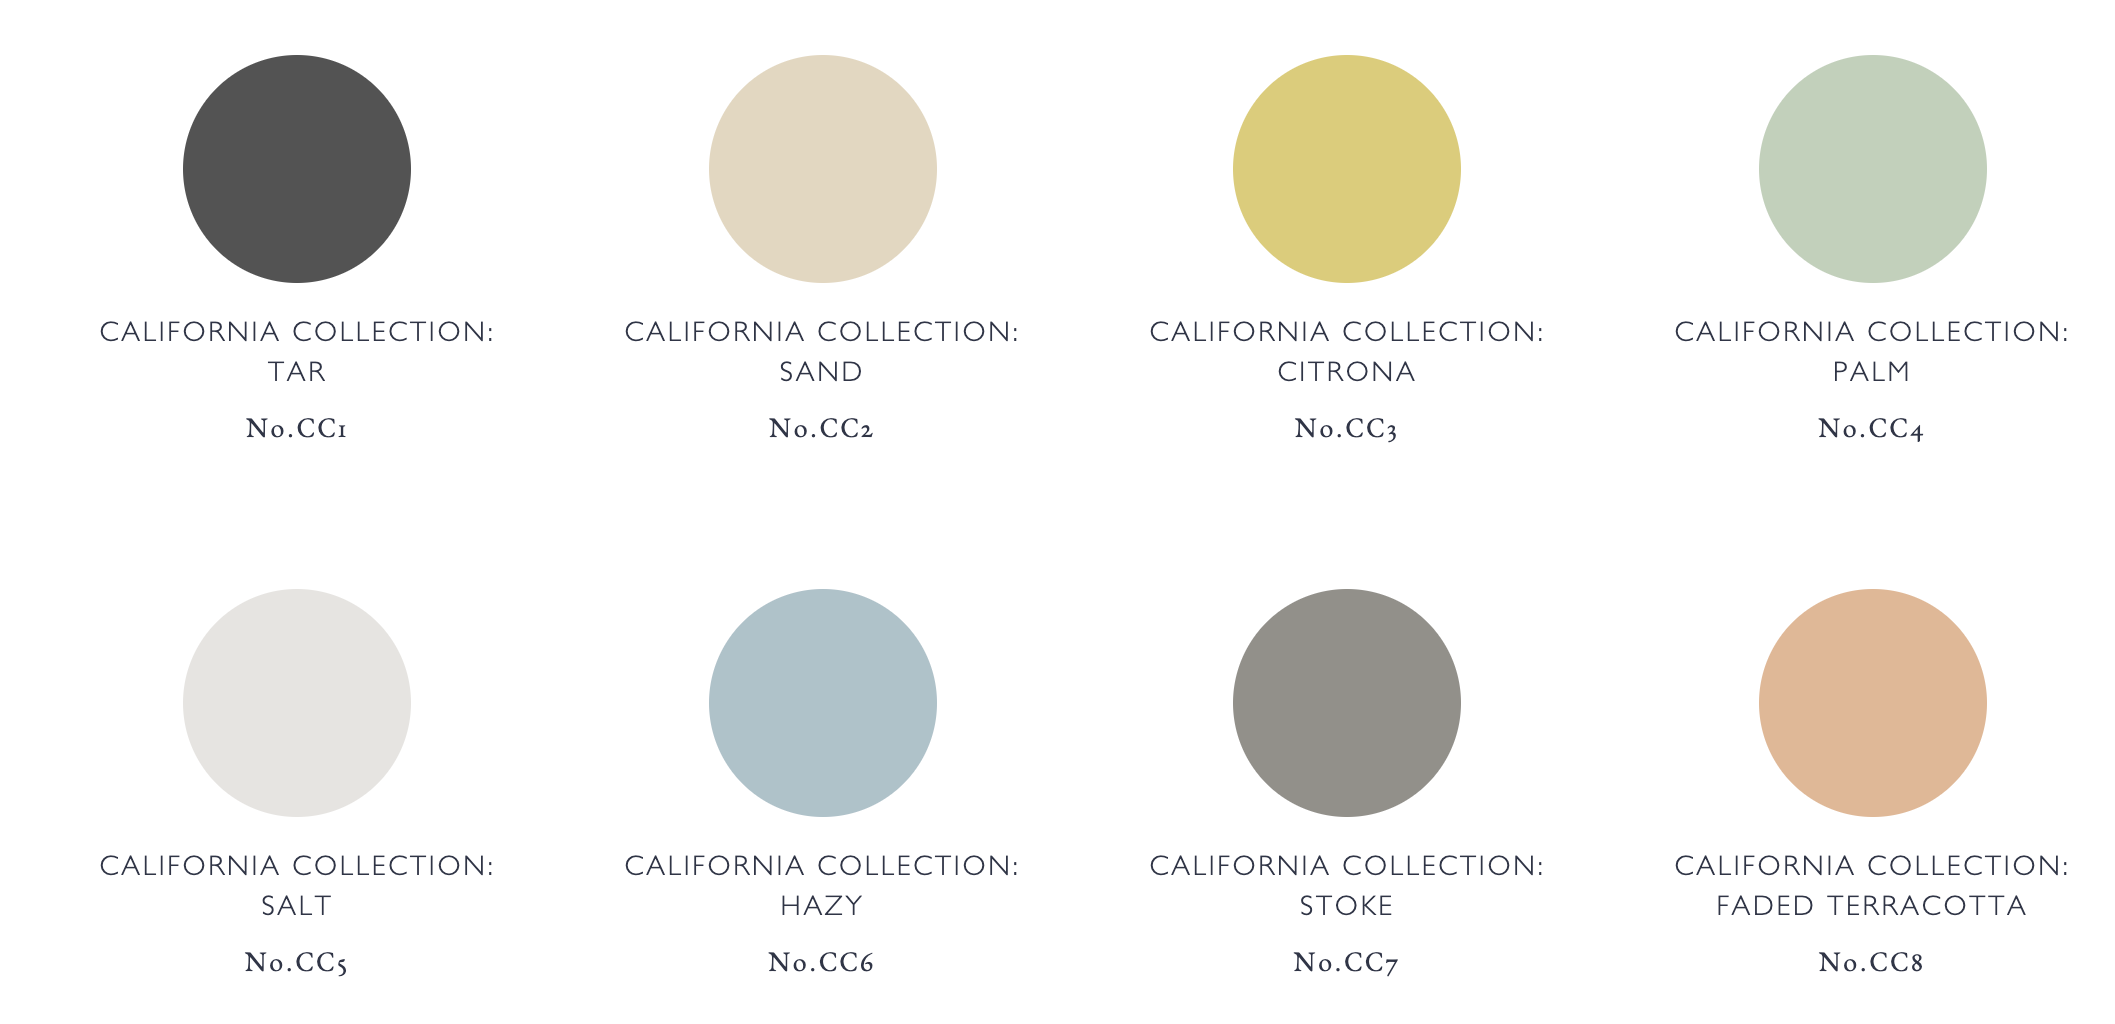 The California Collection By Kelly Wearstler and Farrow & Ball